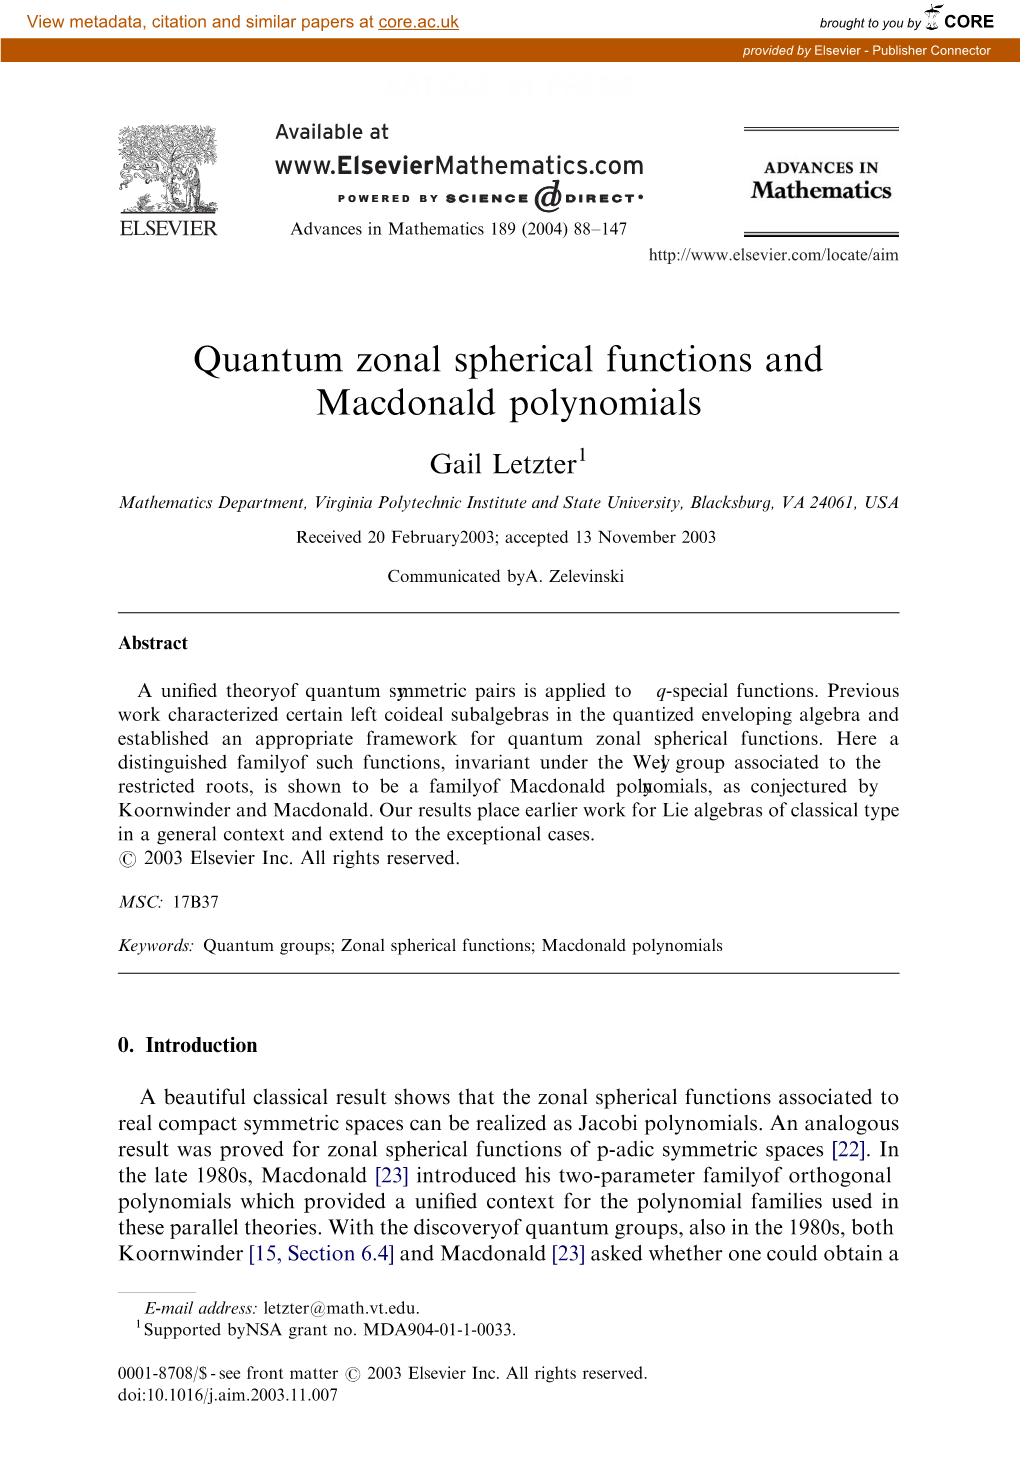 Quantum Zonal Spherical Functions and Macdonald Polynomials